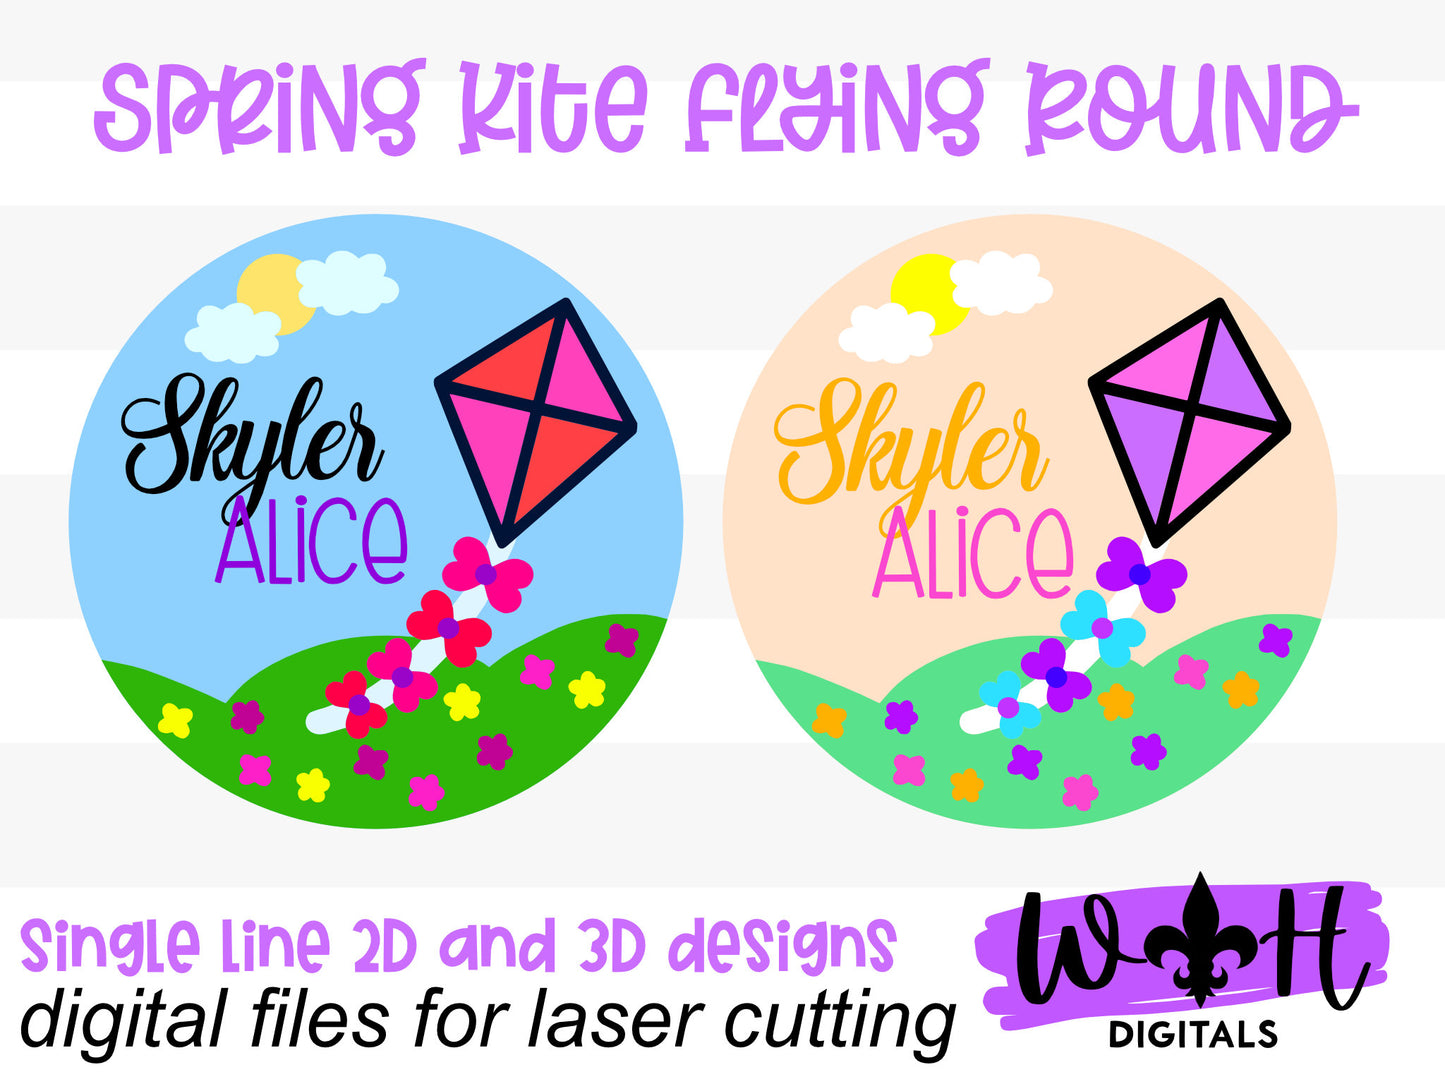 Spring Kite Flying Baby Girl Nursery Round - Floral Sign Making Home Decor and DIY Kits - Cut File For Glowforge Lasers - Digital SVG File